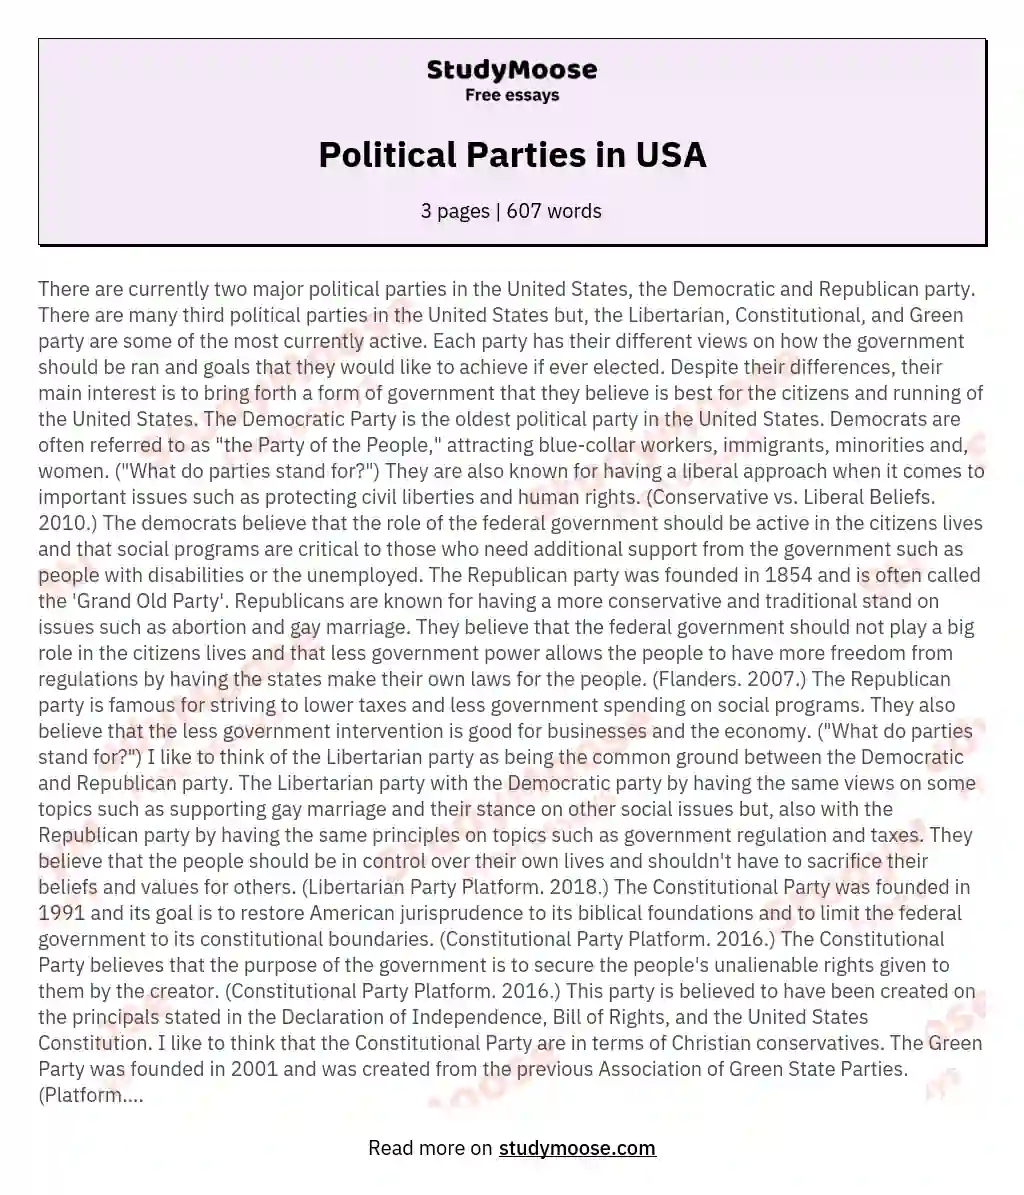 Political Parties in USA